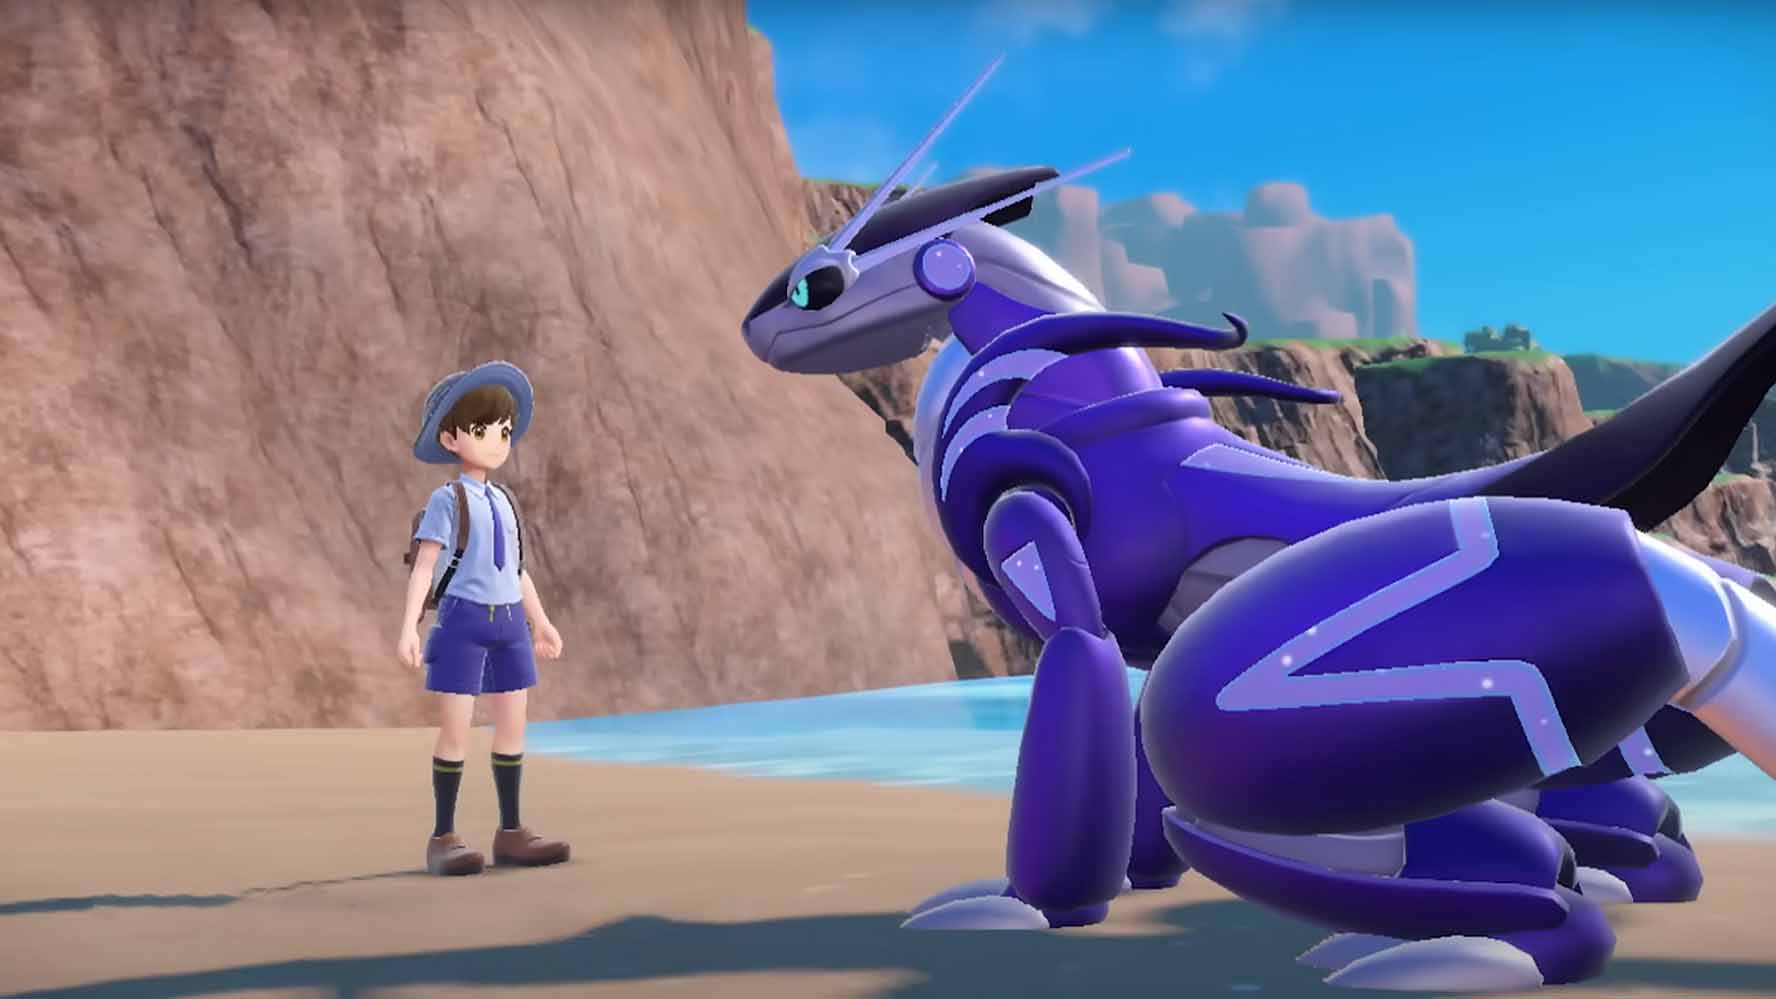 Centro LEAKS on X: POTENTIAL POKÉMON SCARLET AND VIOLET IMAGE LEAKS Looks  like images of different characters from the game are leaking into the  internet. The source hasn't been verified, so take